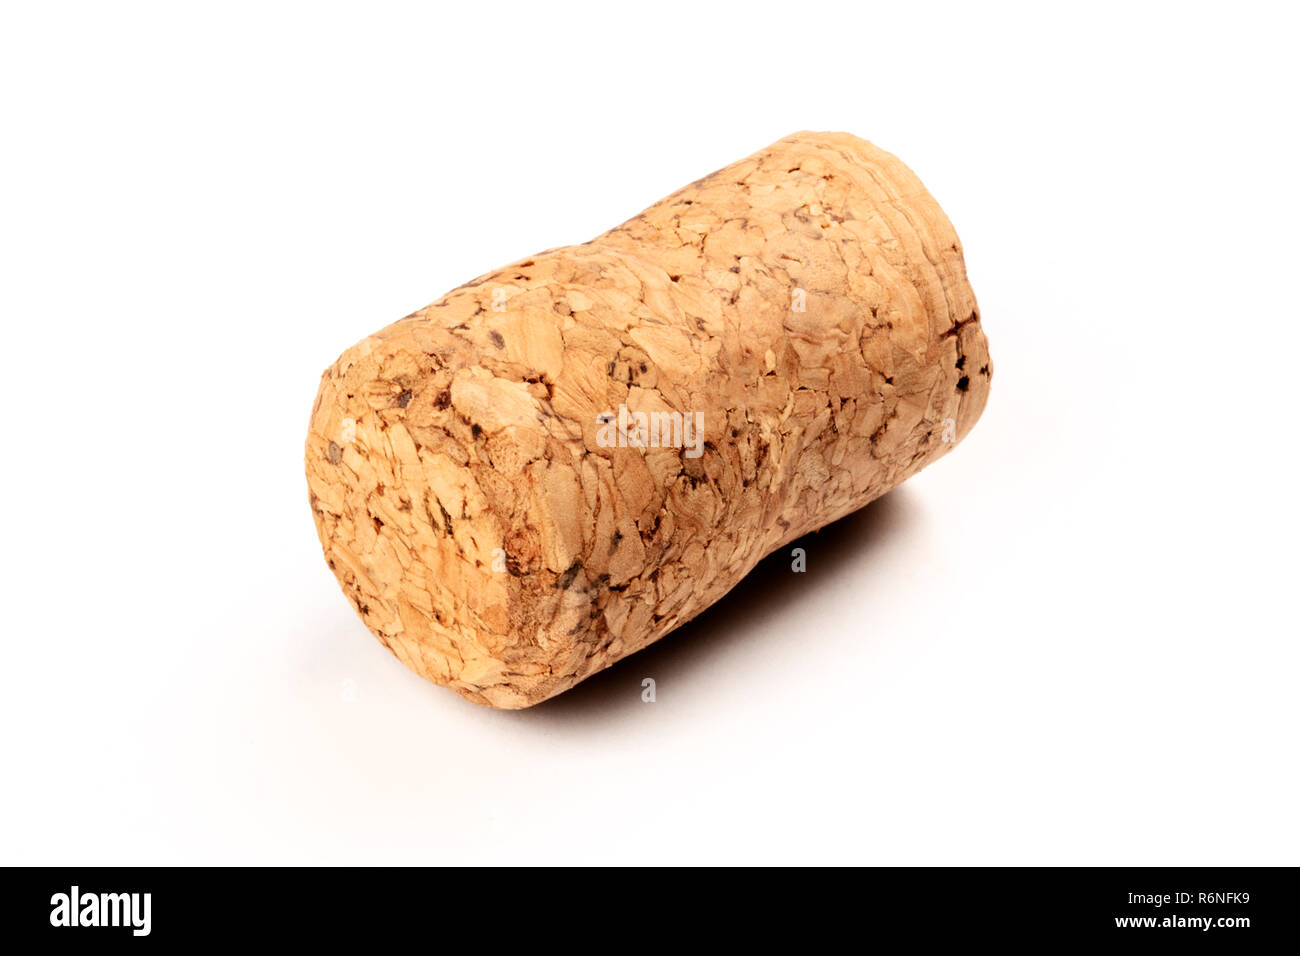 A closeup photo of a champagne cork on a white background with copy space Stock Photo